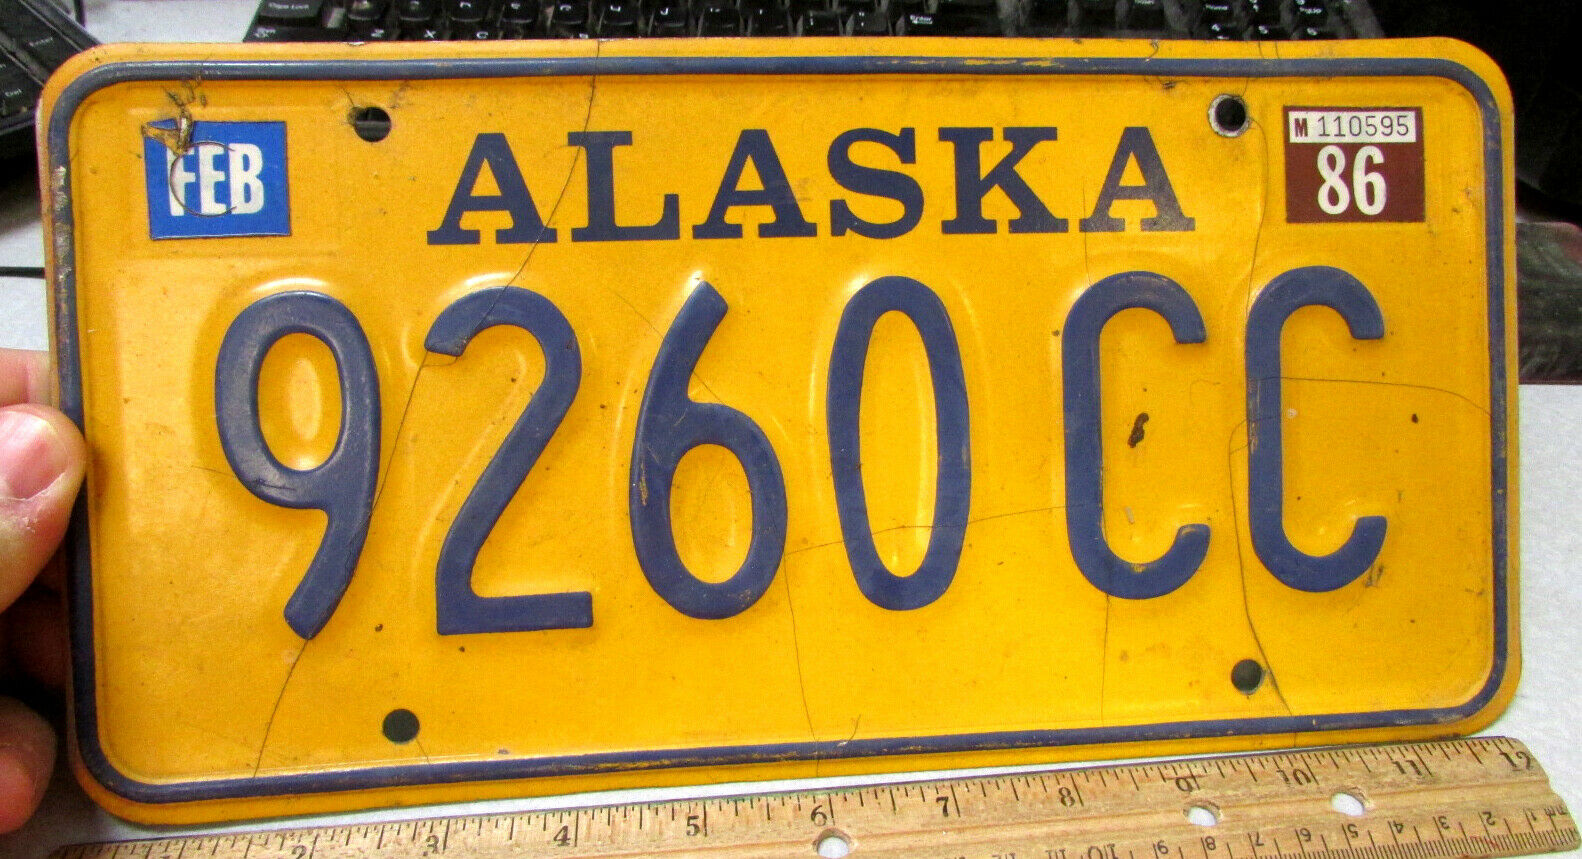 Alaska License Plate Gold Style Truck Issue Plate 9260 Cc, Expired 1986